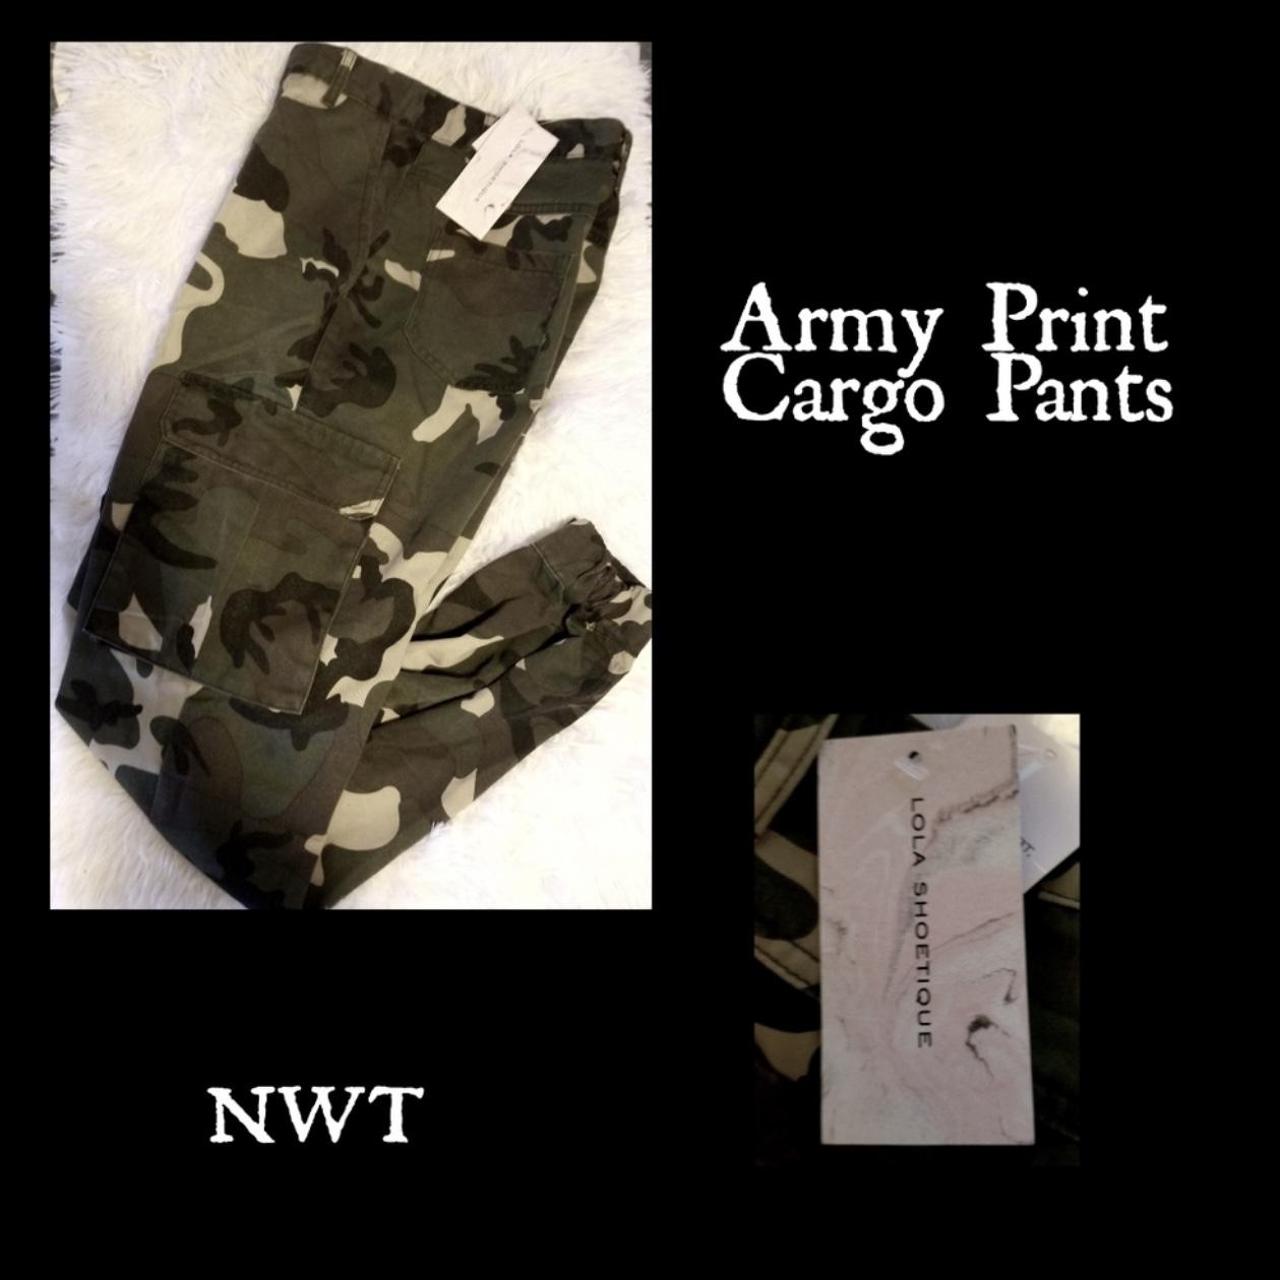 Product Image 1 - Cargo army print pants, new